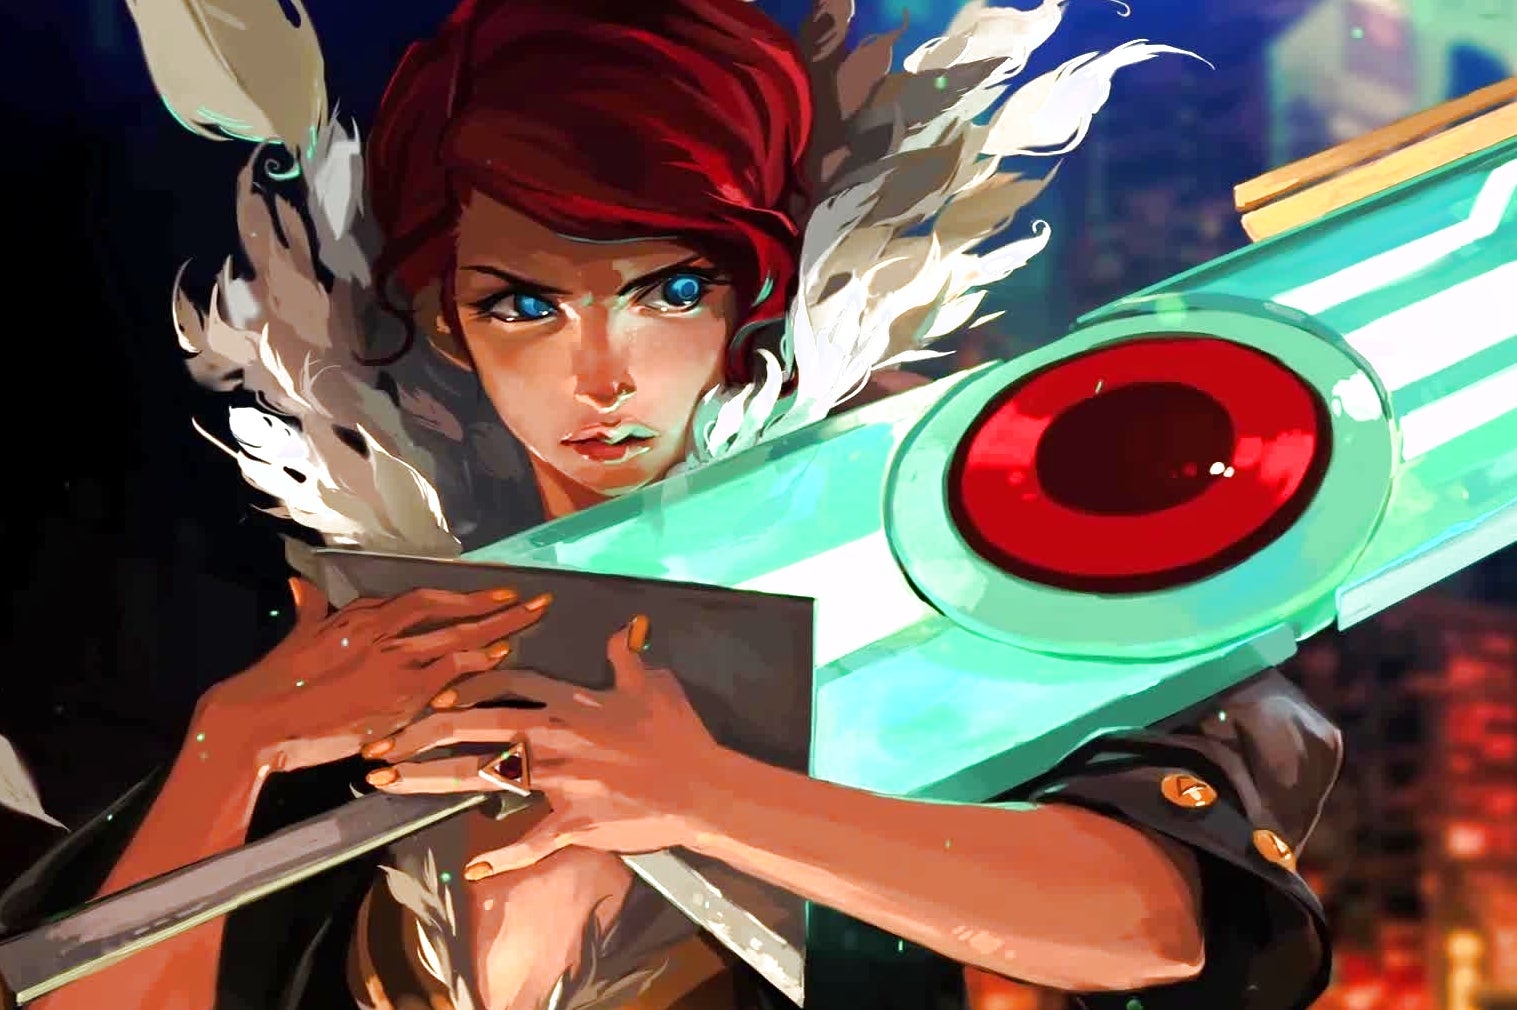 Image for Bastion creator announces new game Transistor